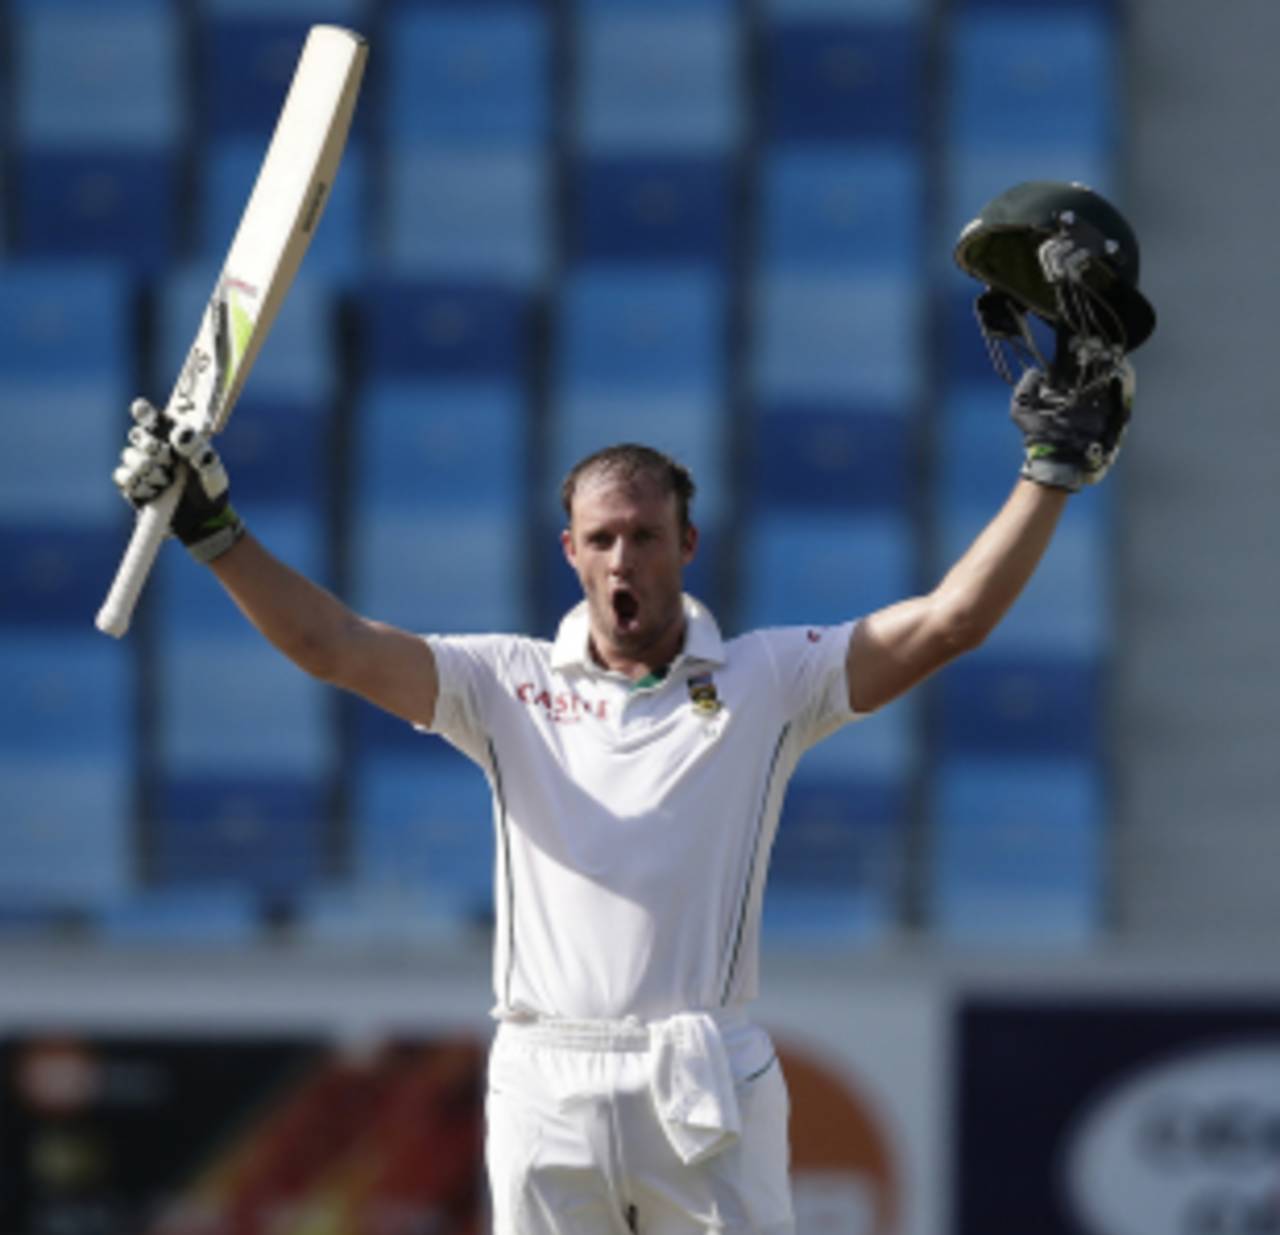 AB de Villiers raises his arms after reaching his ton, Pakistan v South Africa, 2nd Test, Dubai, 2nd day, October 24, 2013